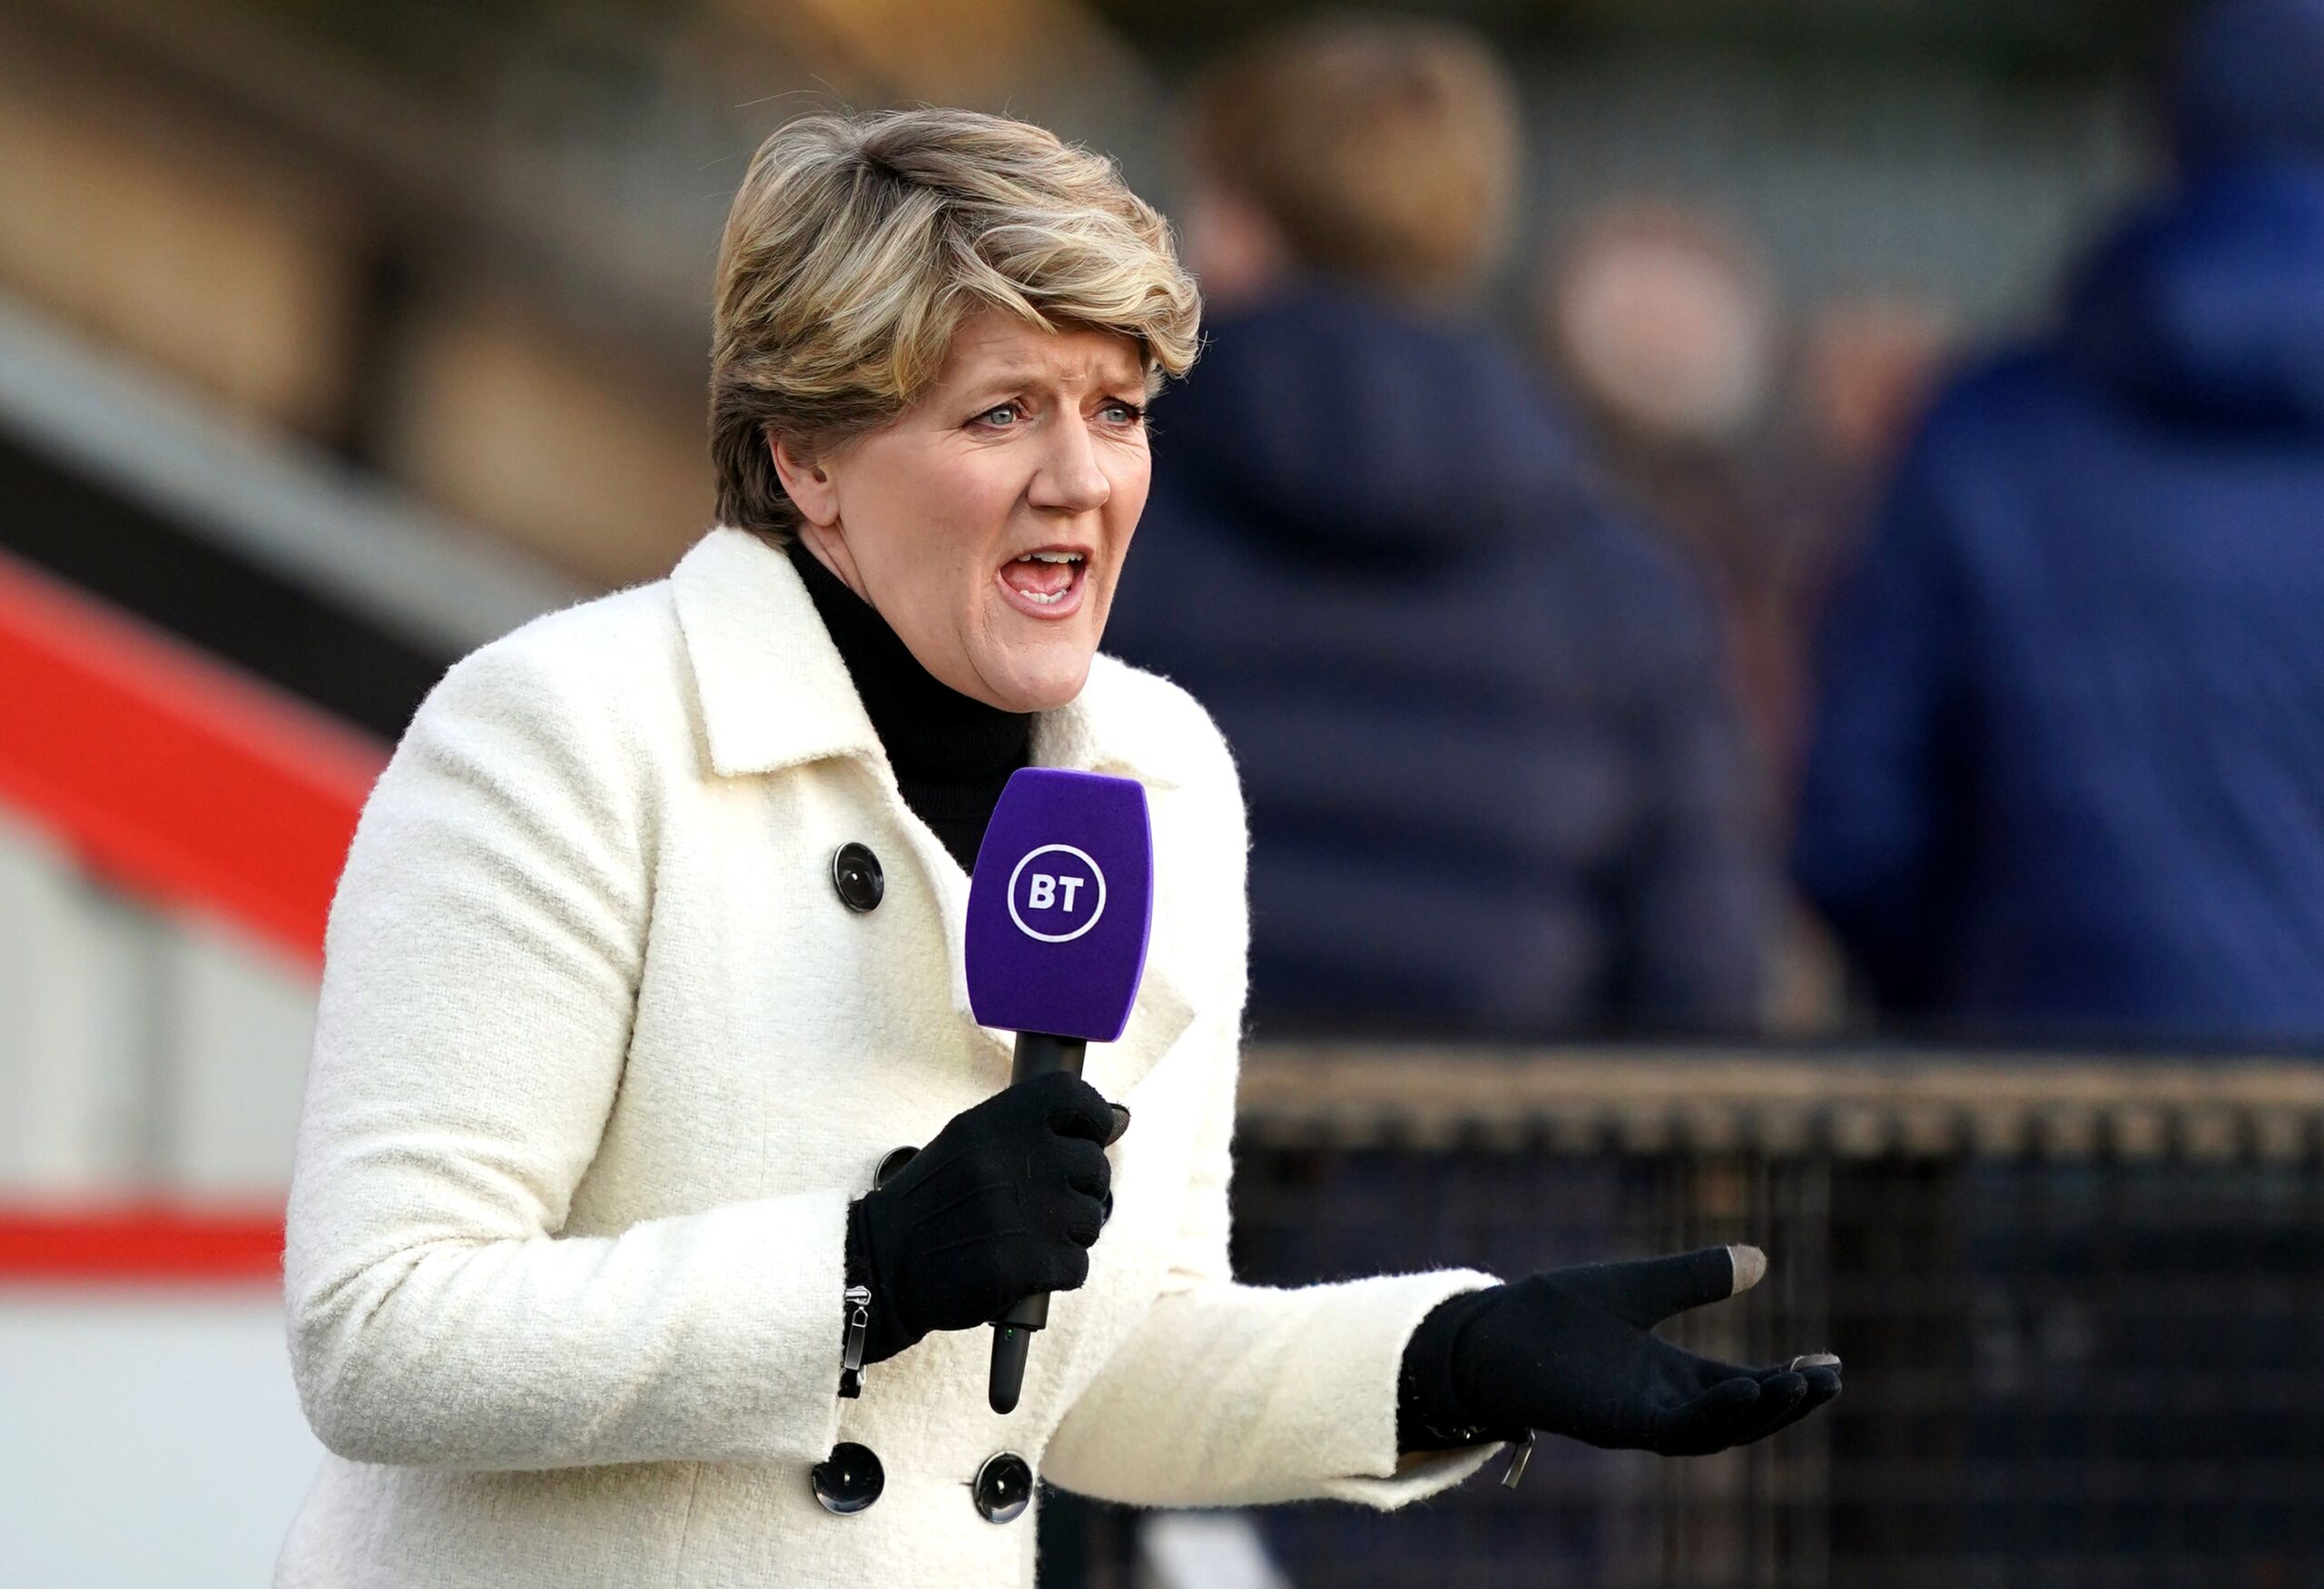 Clare balding on the things that drive her